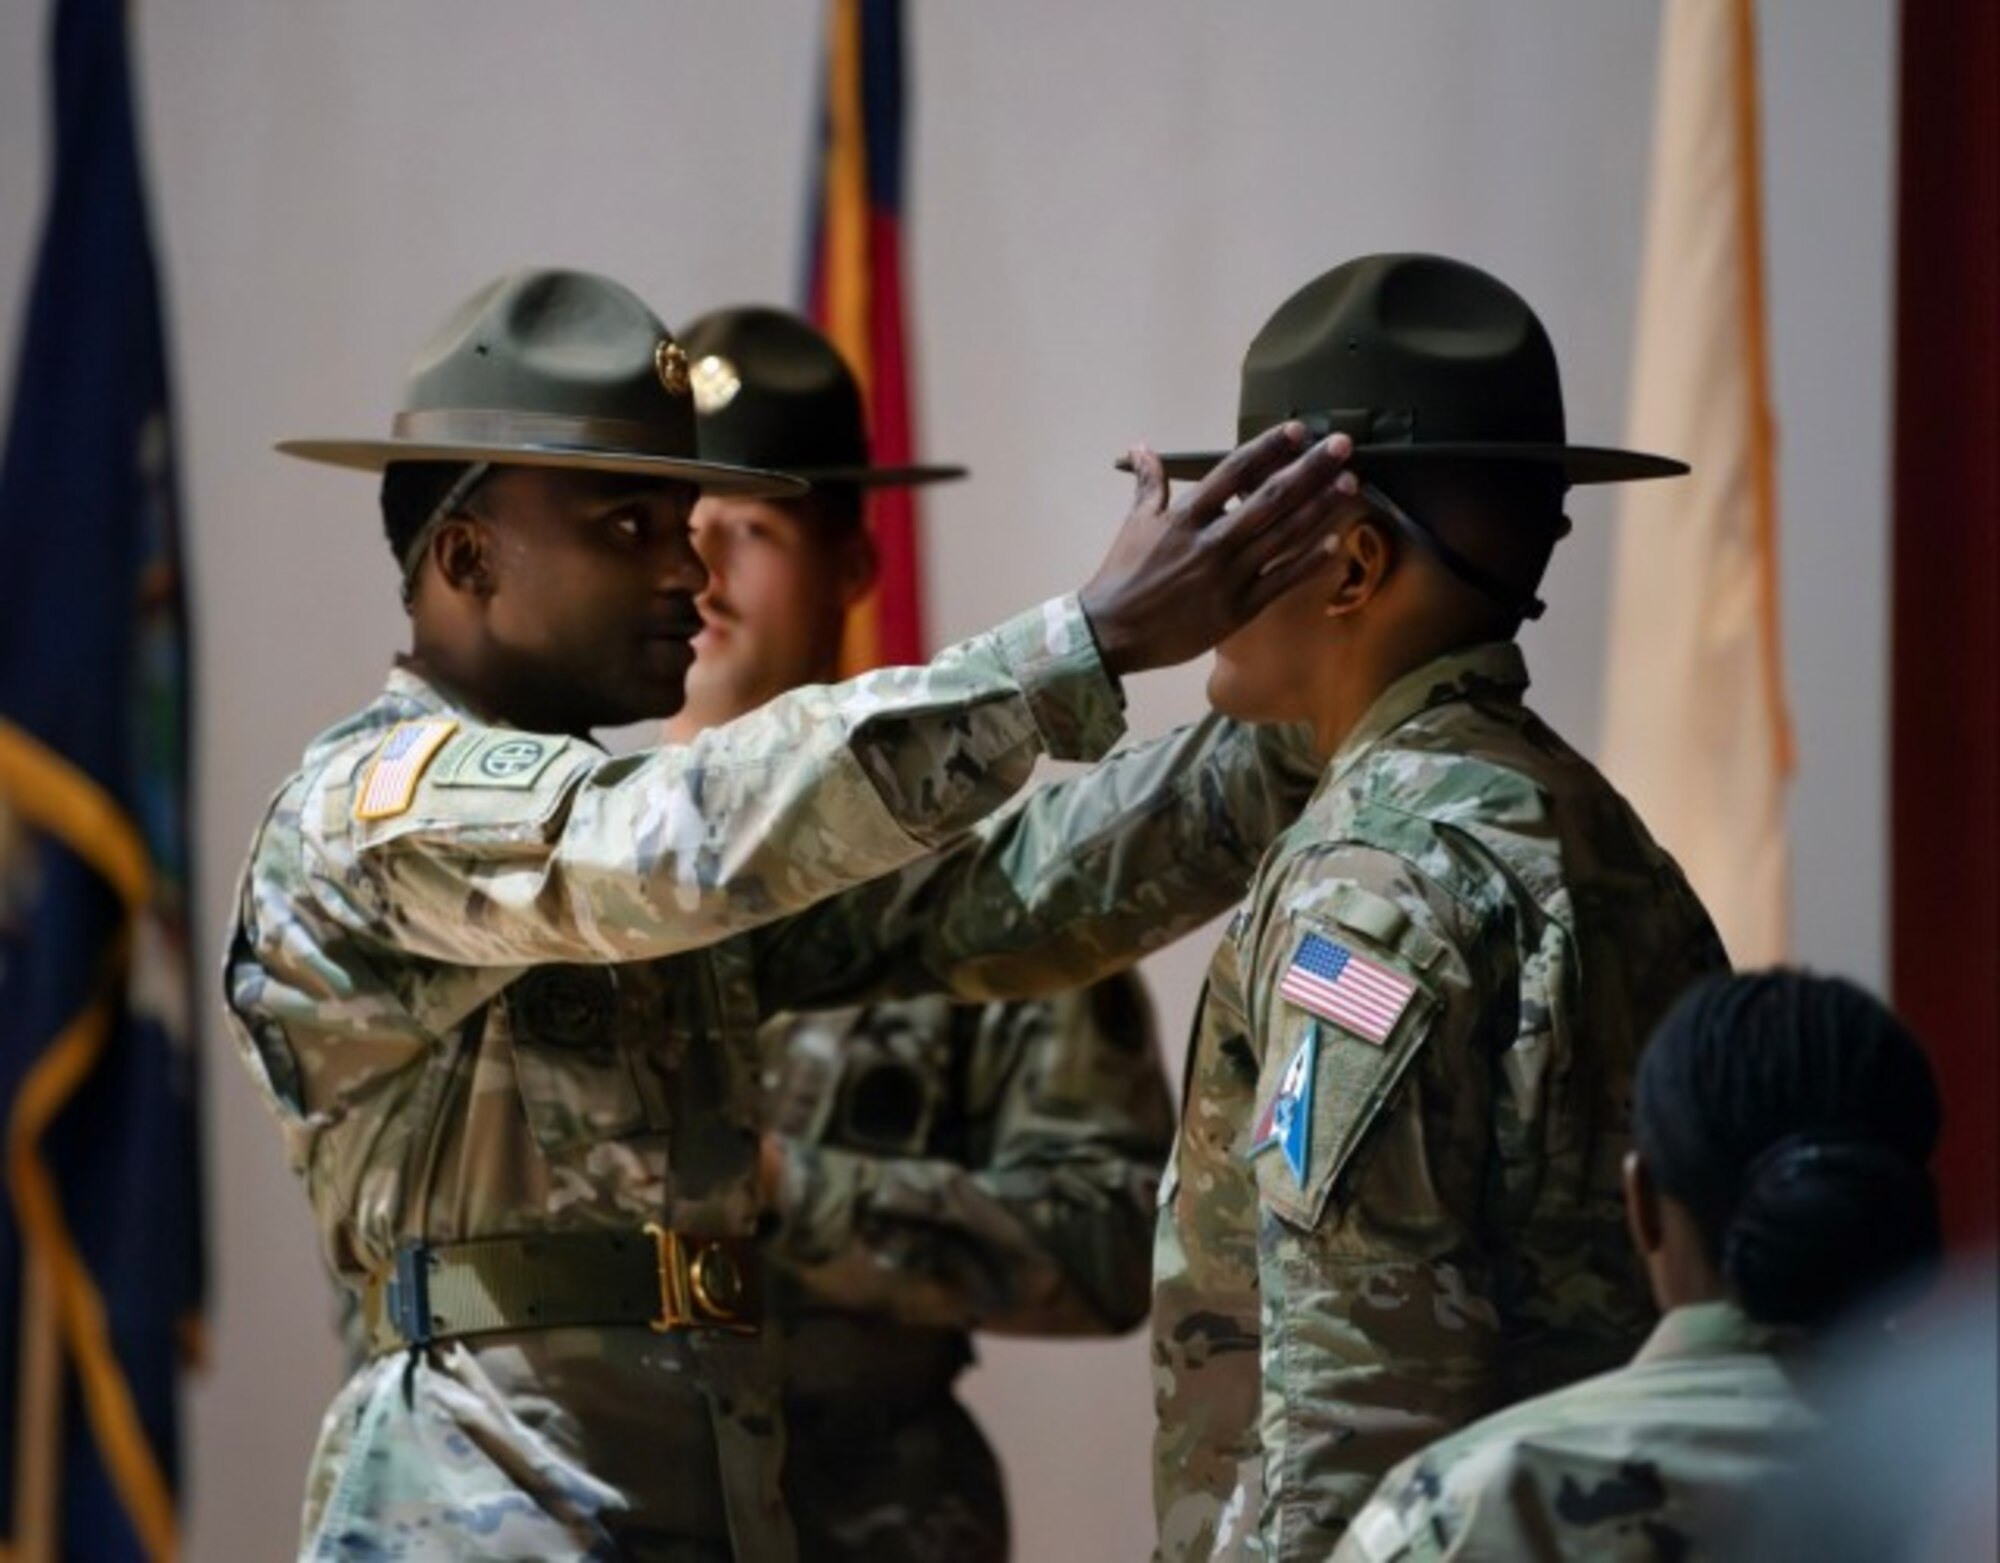 U.S. Army Sgt. 1st Class Sytoi K. Warren, senior drill sergeant leader, adjusts the drill sergeant hat of Sgt. Yugi R. Moore, during a graduation ceremony at the U.S. Army Drill Sergeant Academy in Fort Jackson, S.C., April 3, 2024. Moore was one of first Guardians to graduate from the academy. (U.S. Army photo by Robert Timmons)